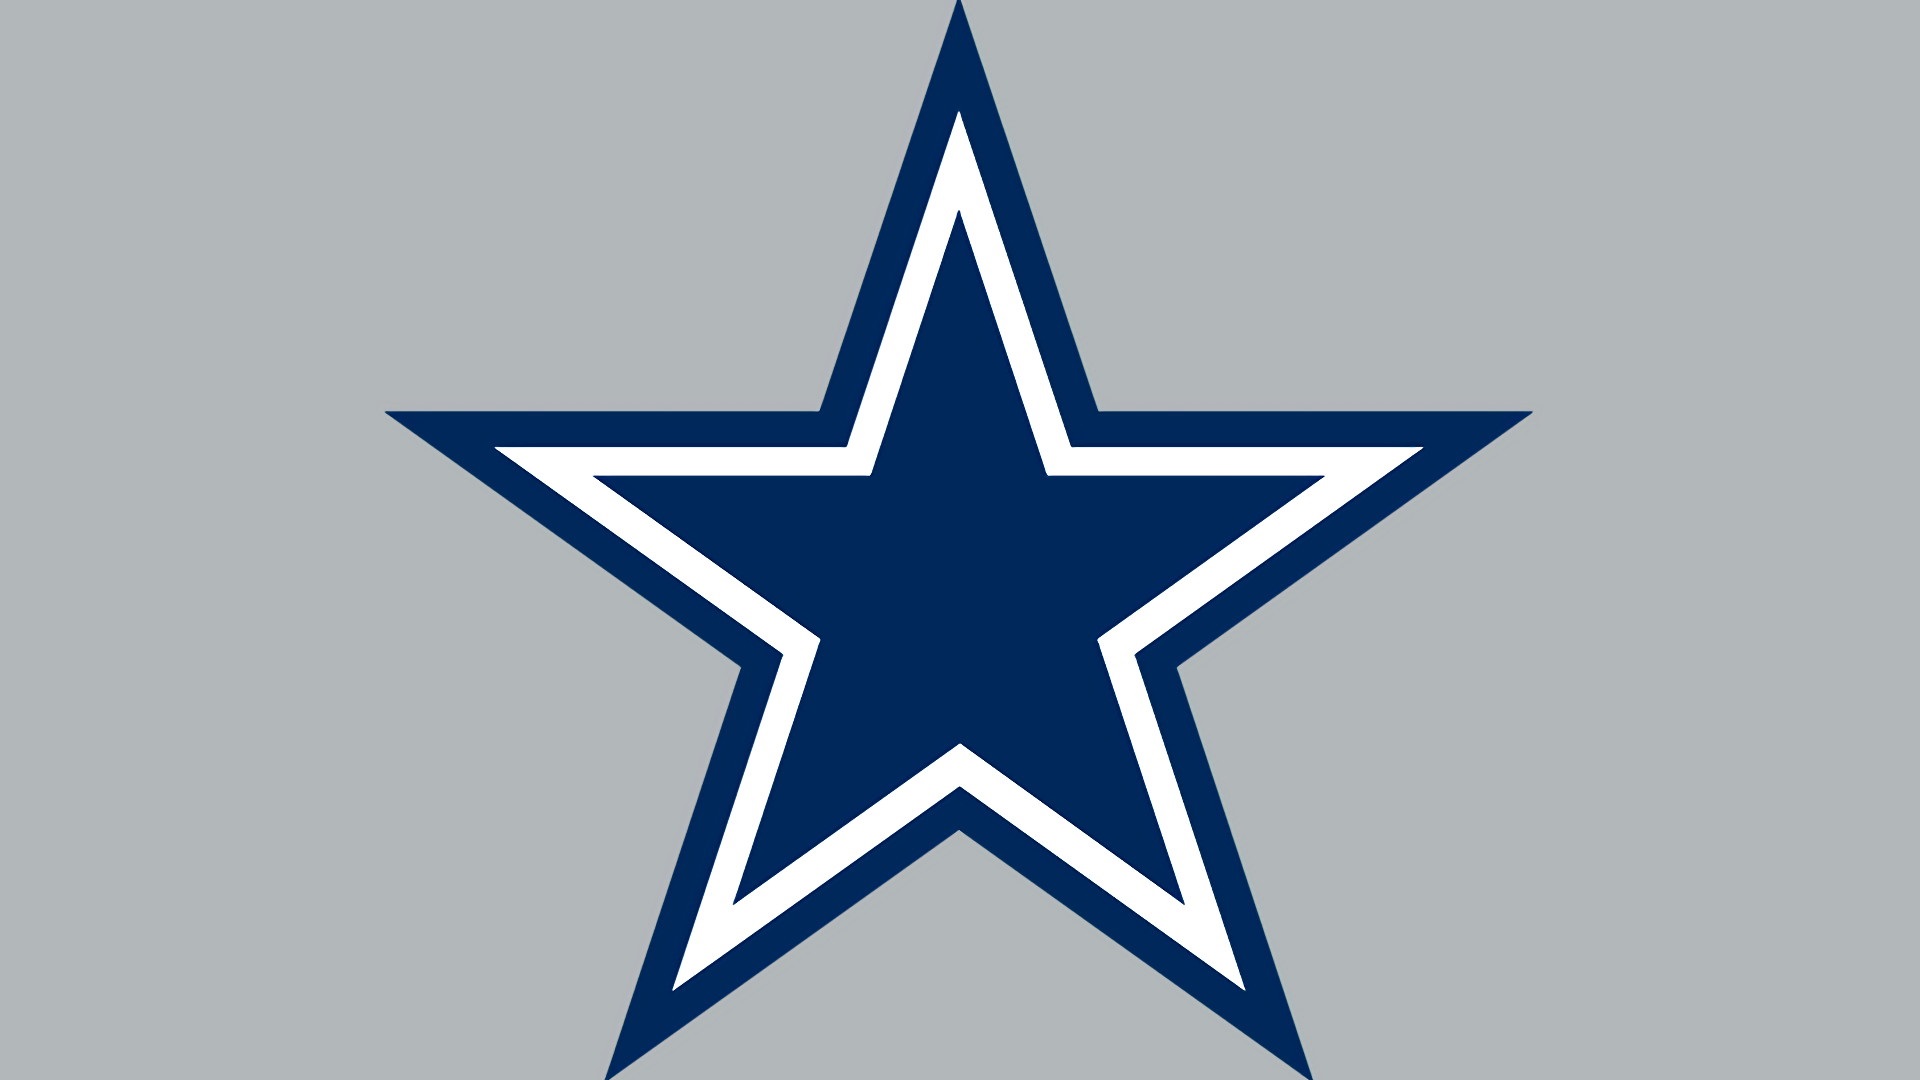 Dallas Cowboys Macbook Backgrounds with high-resolution 1920x1080 pixel. You can use and set as wallpaper for Notebook Screensavers, Mac Wallpapers, Mobile Home Screen, iPhone or Android Phones Lock Screen